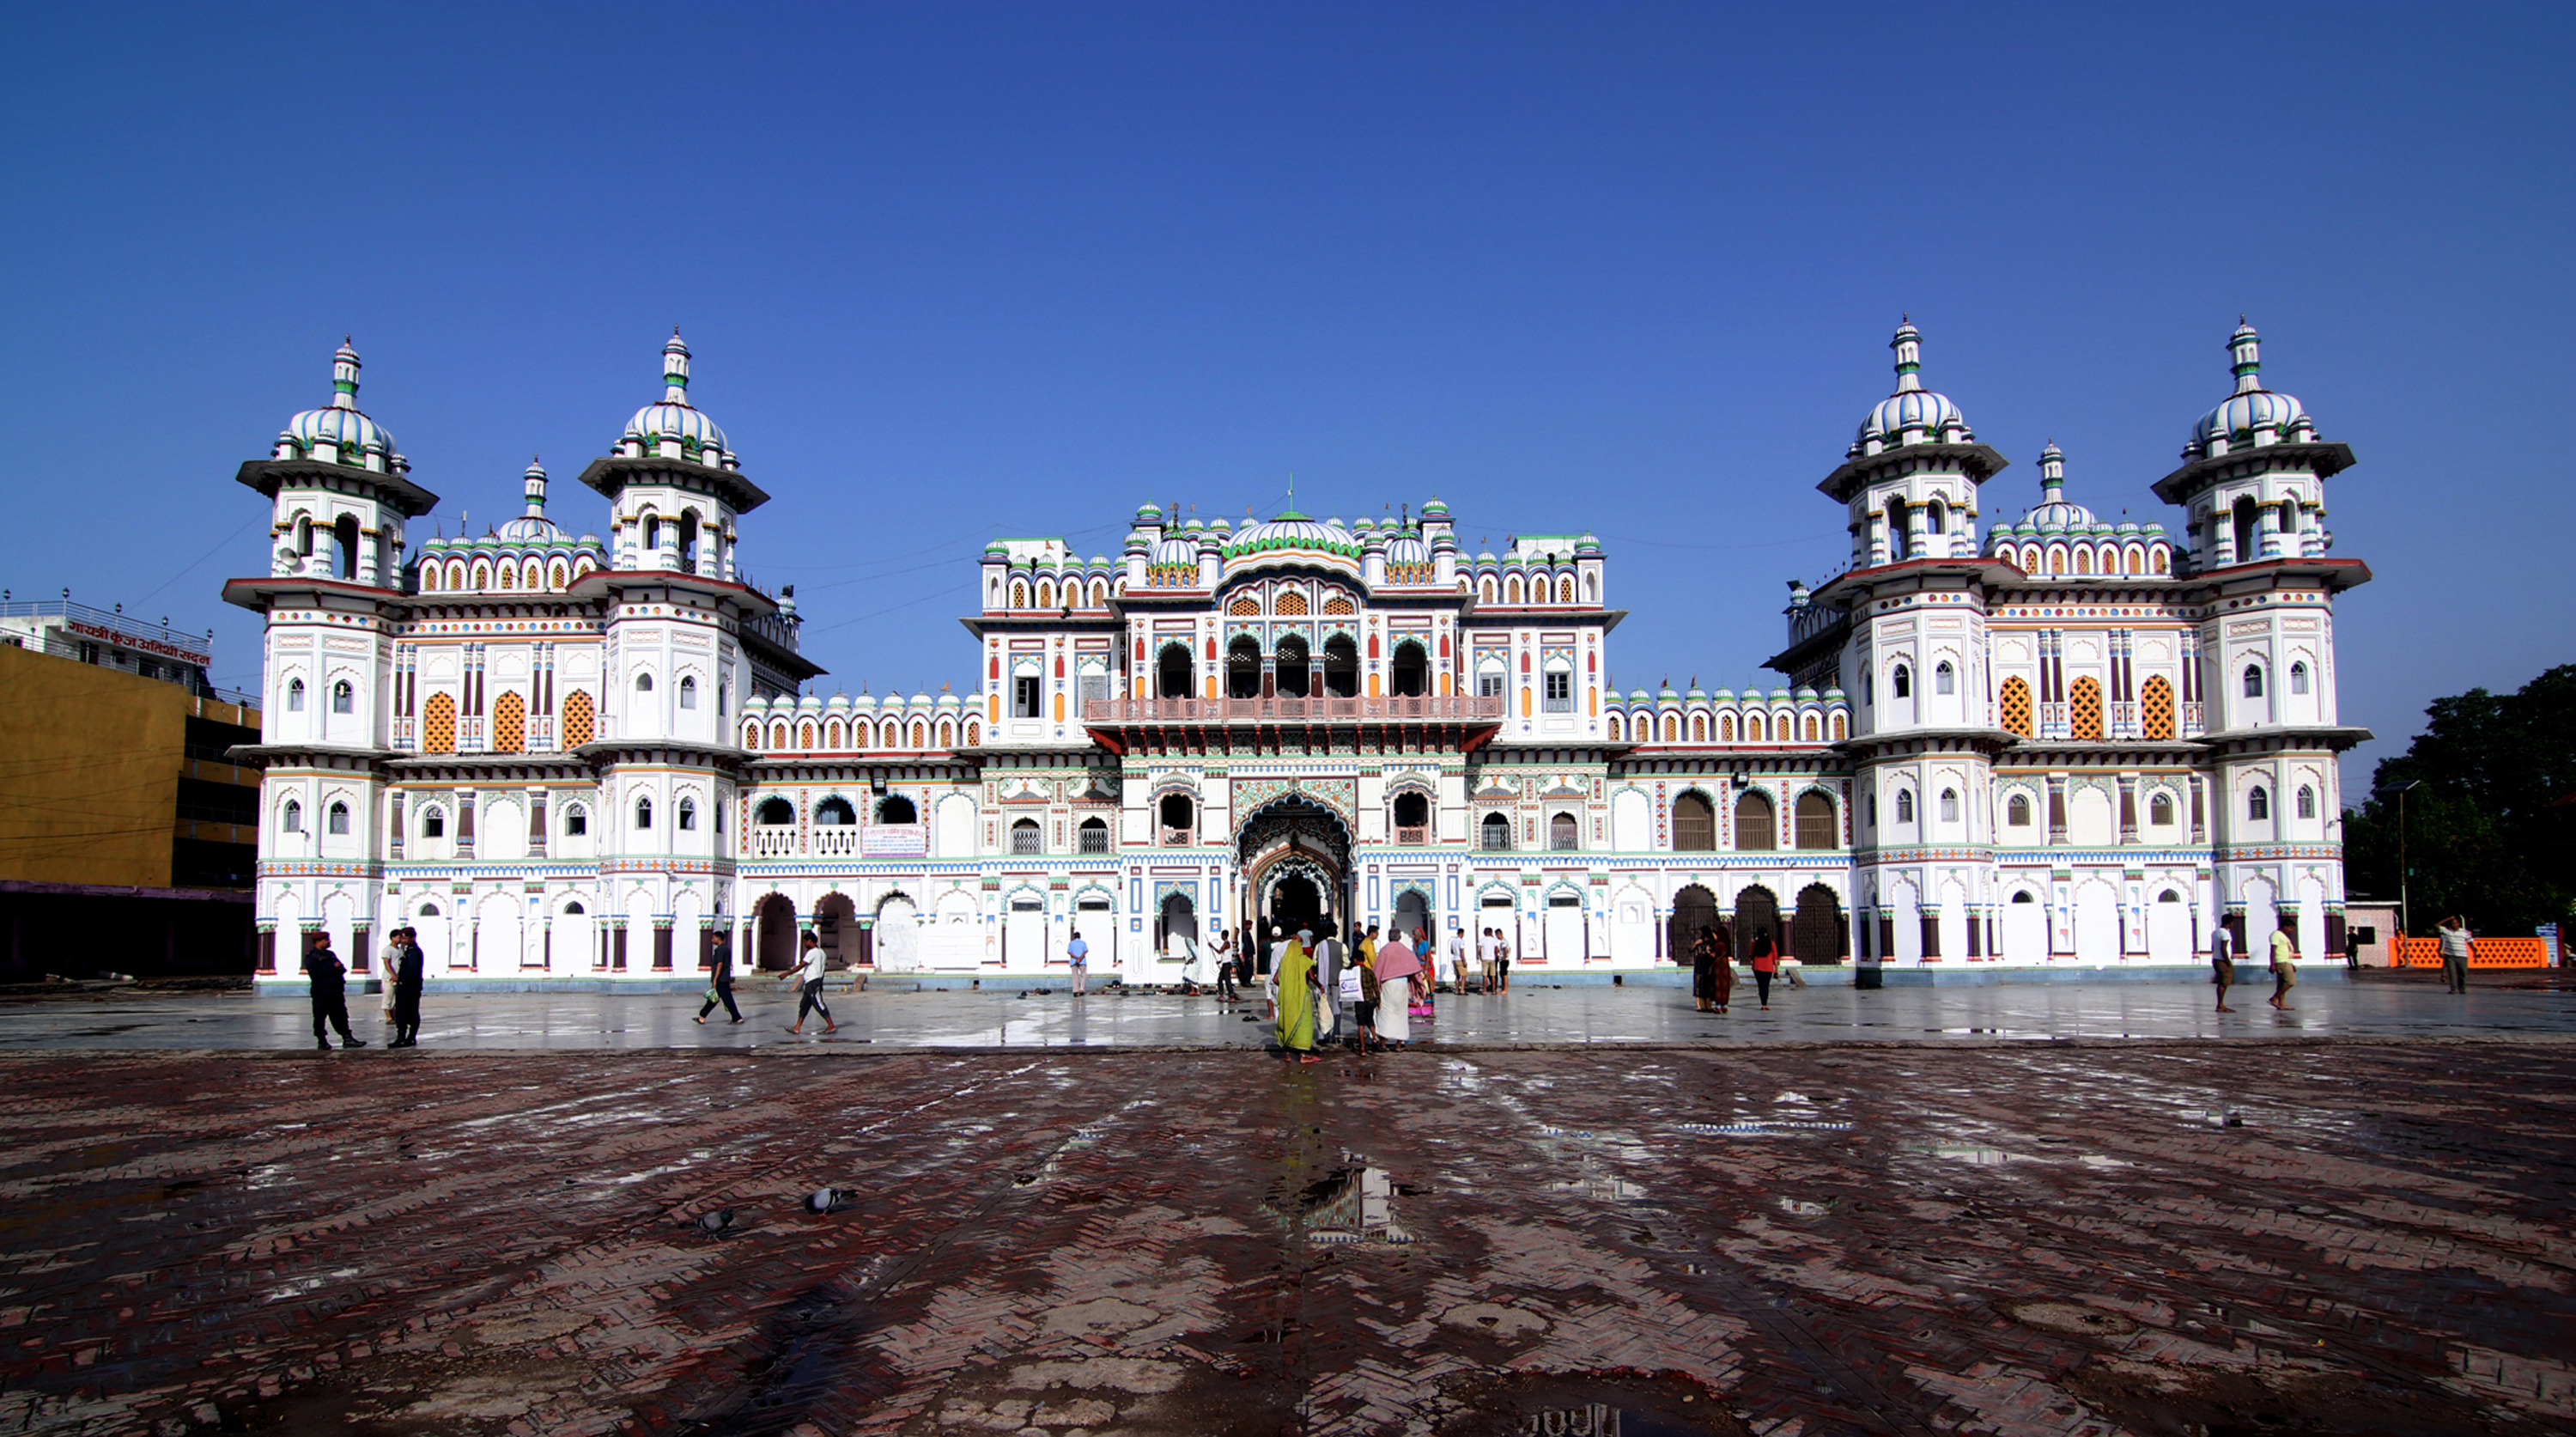 Here's what you can do when you are in Janakpur